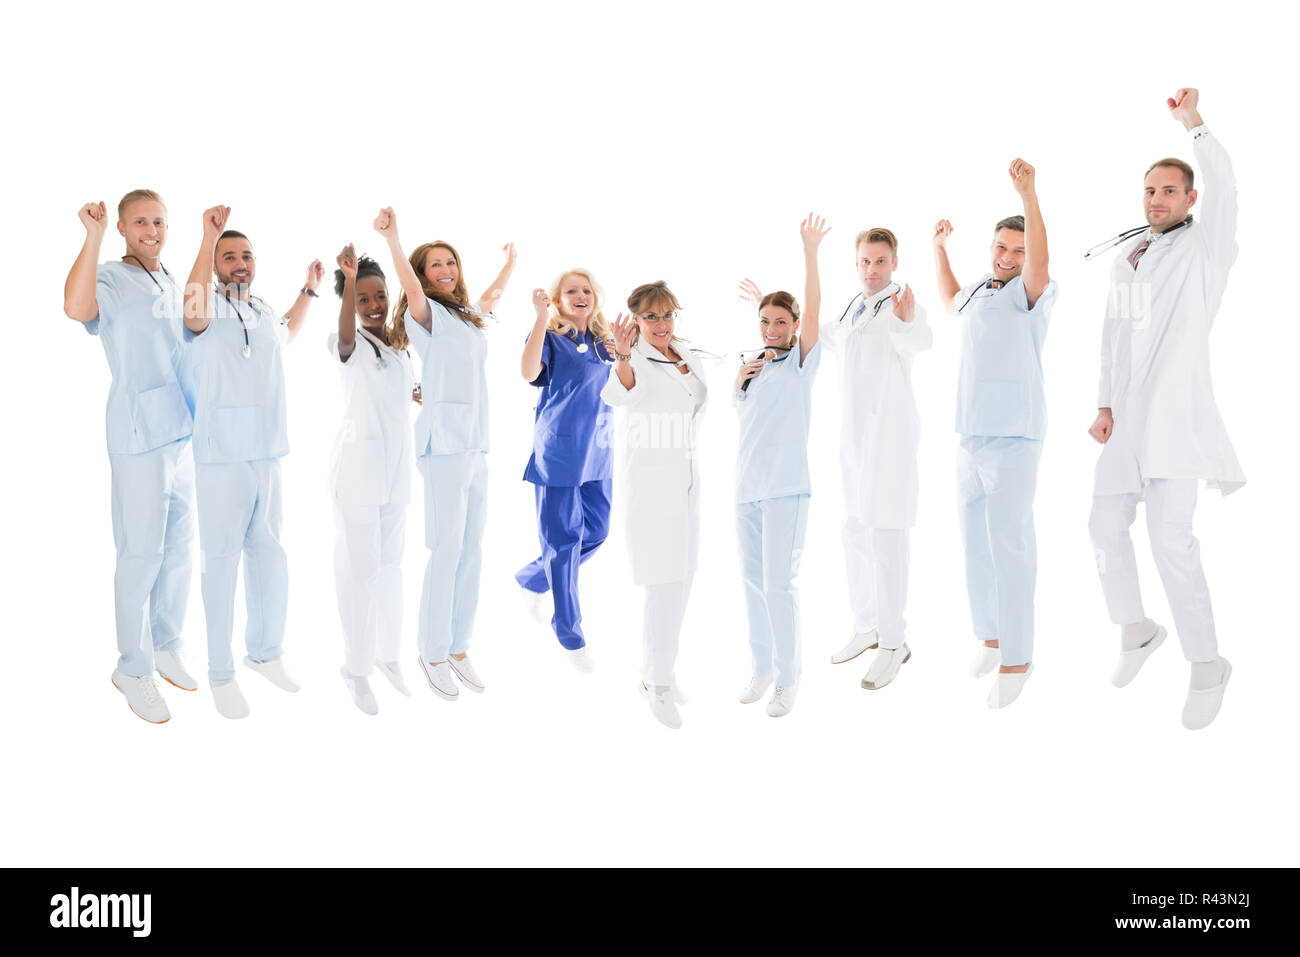 Multiethnic Medical Team Standing With Arms Raised Stock Photo